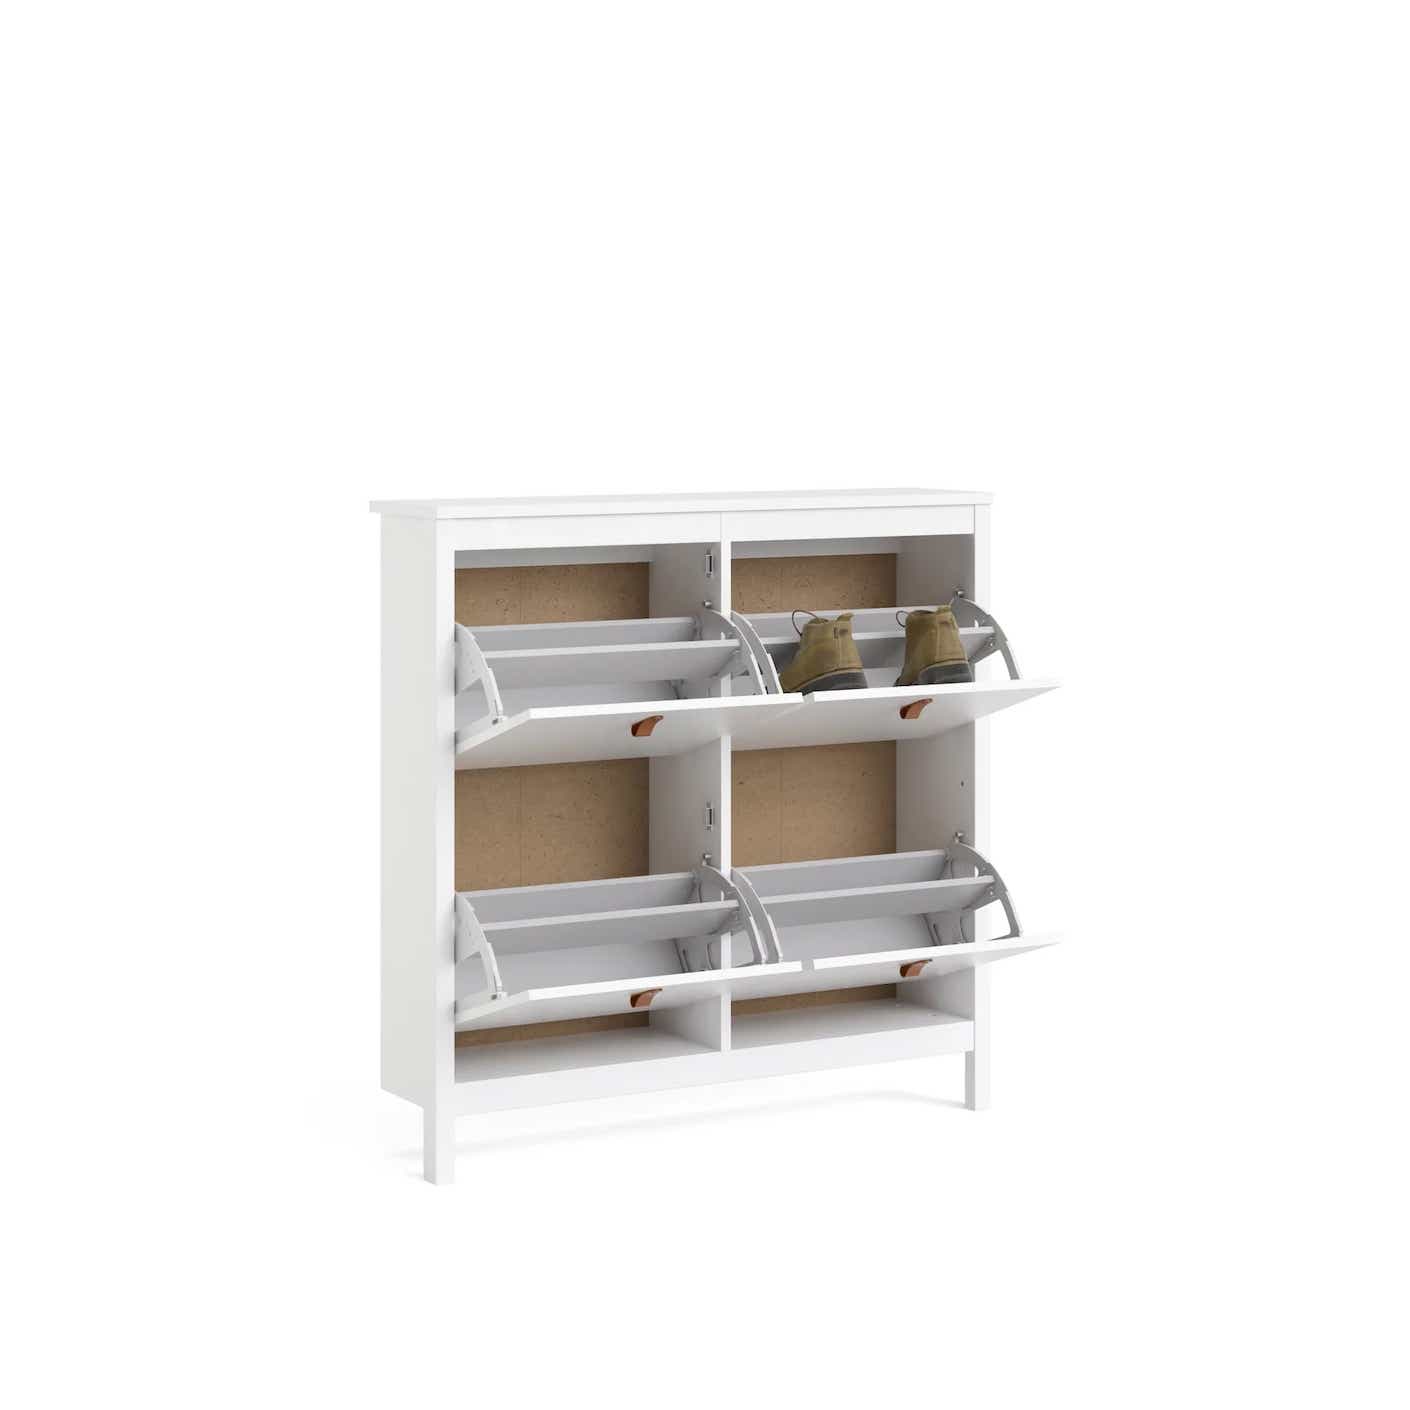 A white shoe cabinet is shown open to reveal inner shoe racks.